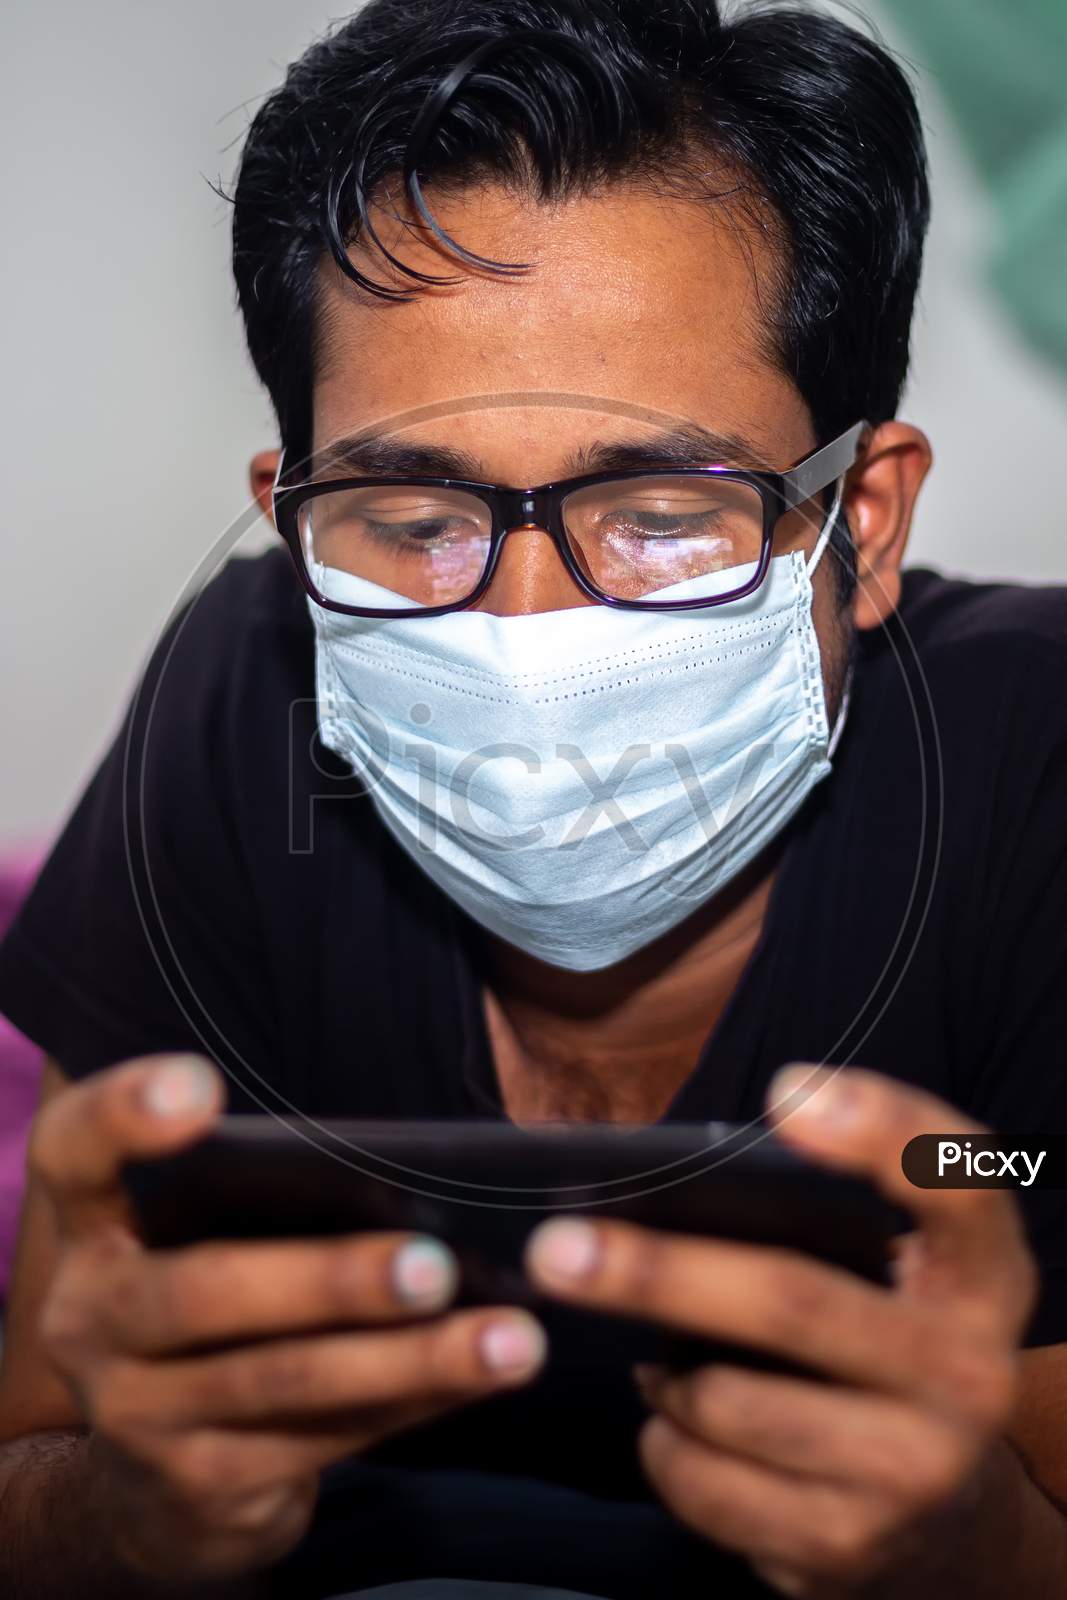 Portrait Of A Young Man Playing Mobile Video Games At Night Deu To Coronavirus Epidemic.